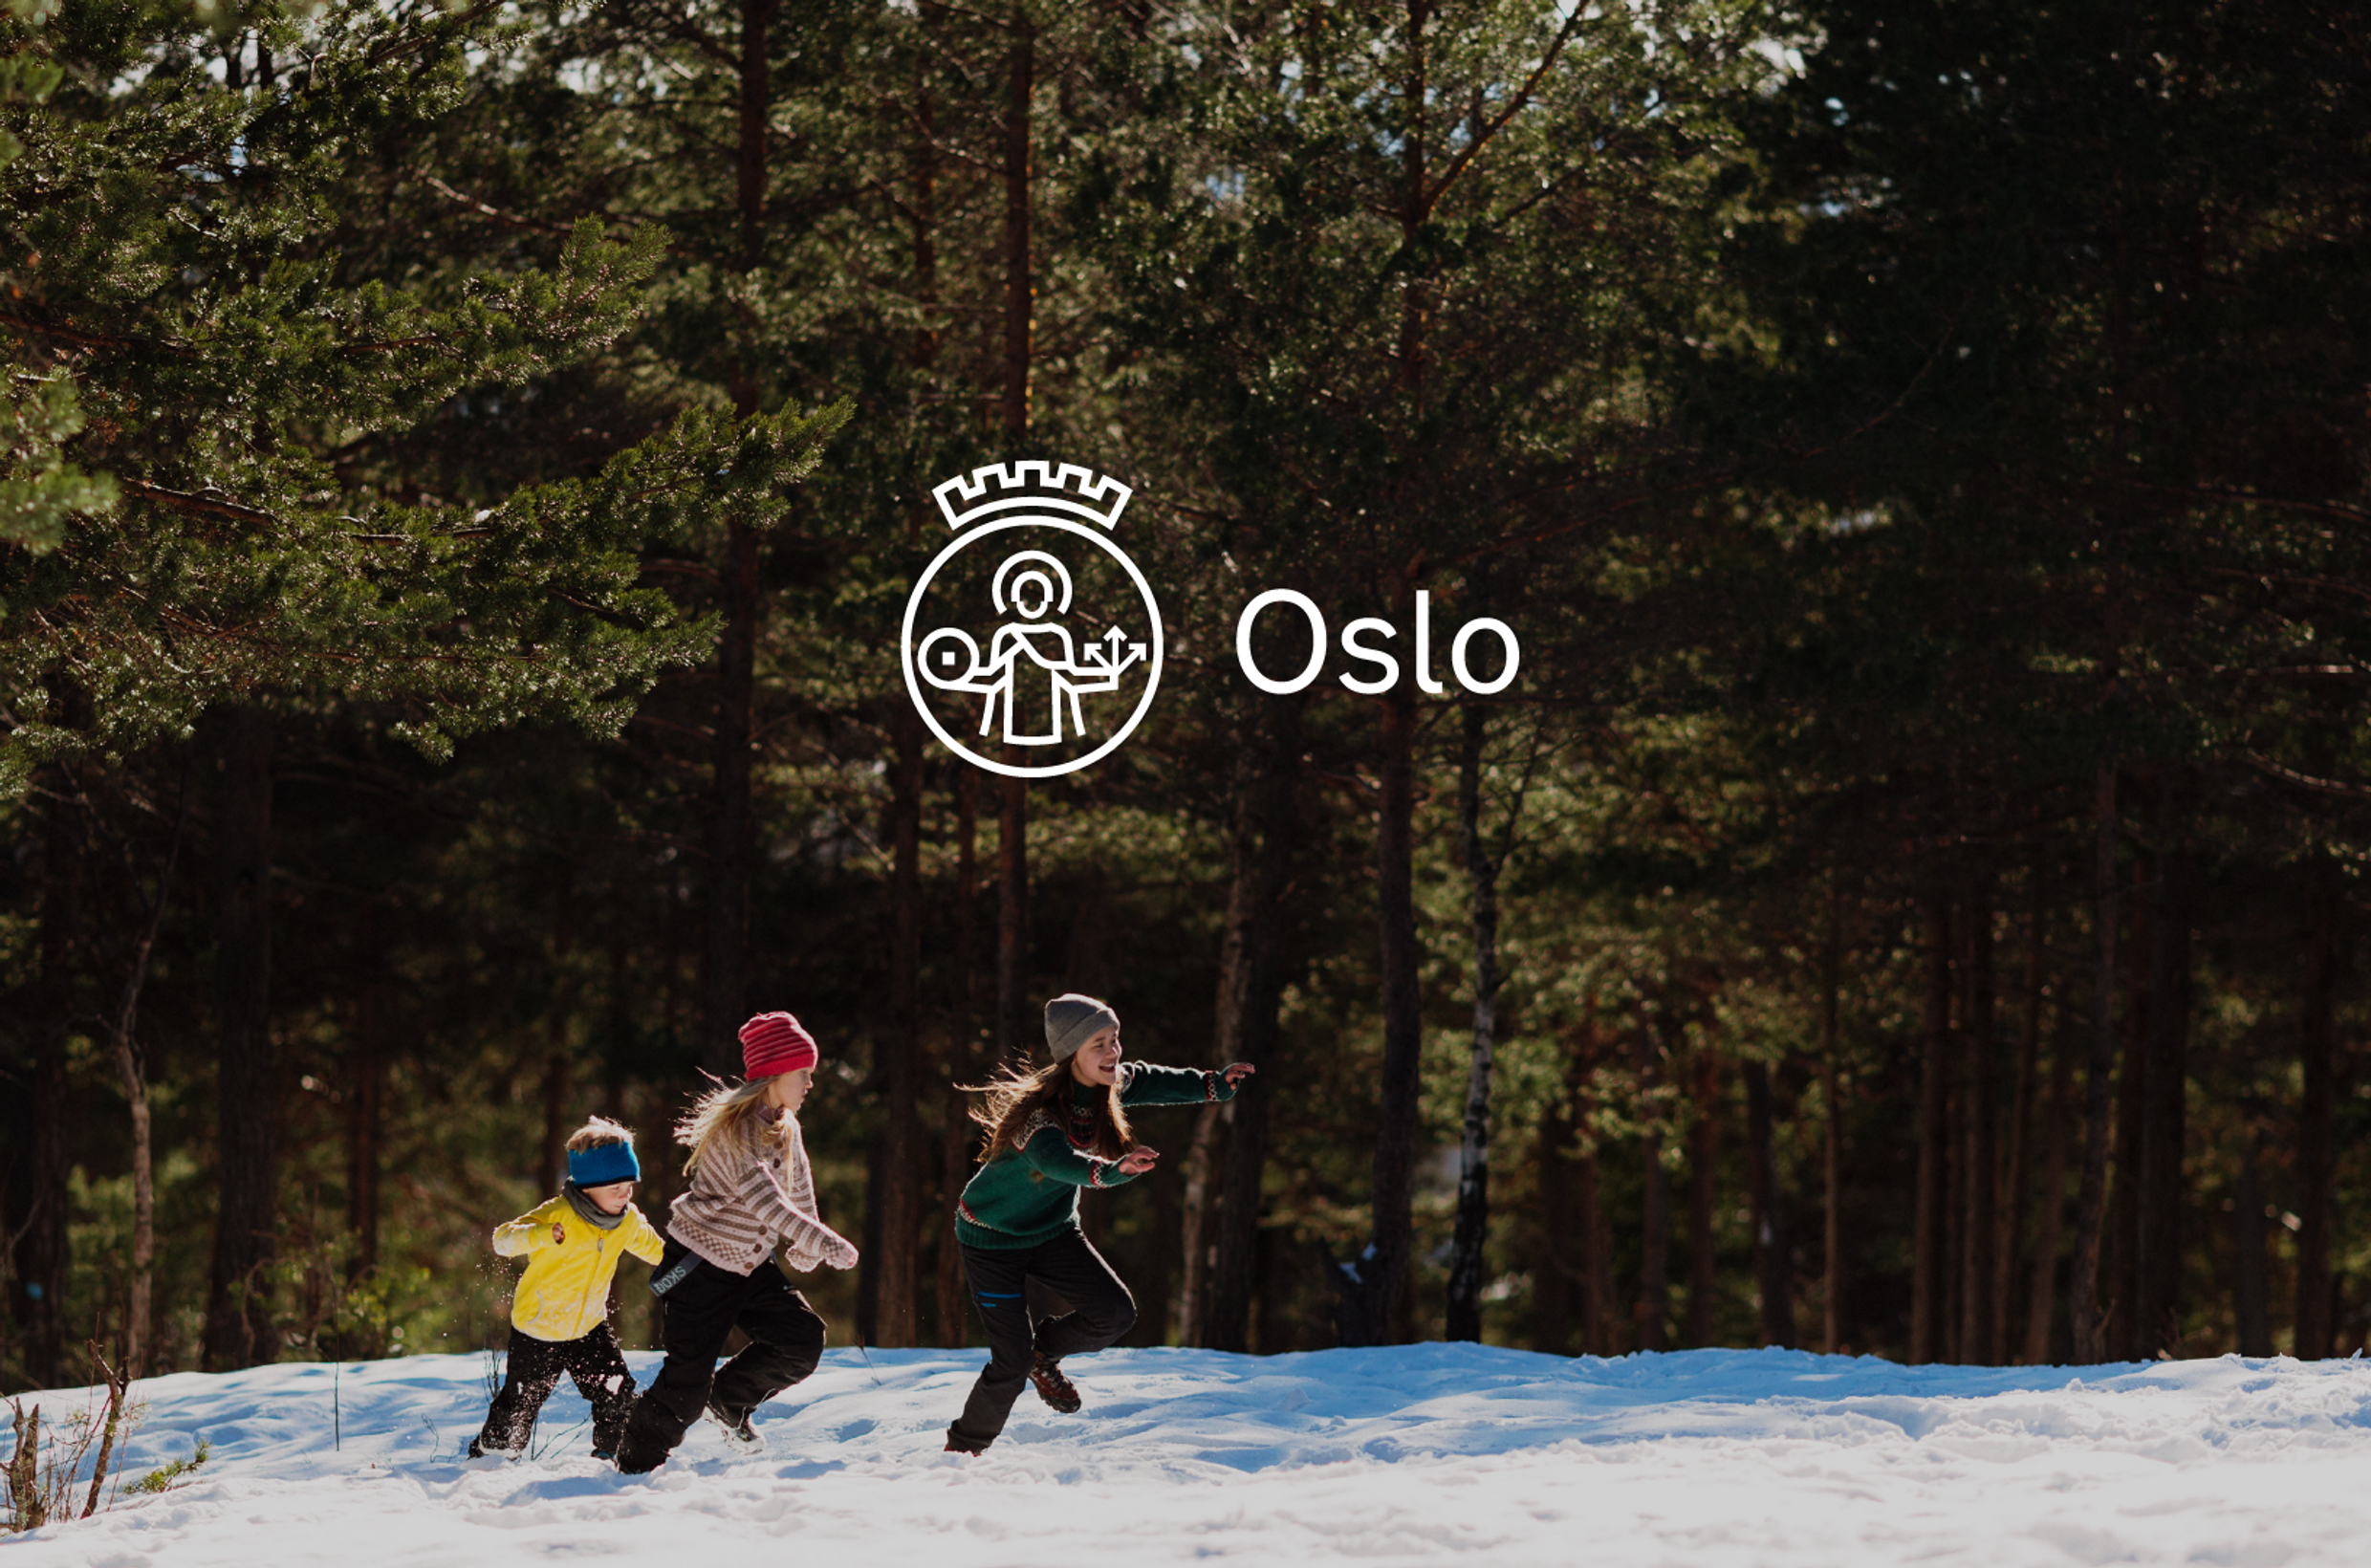 A photo of a forest with snow on the ground, three people are walking in the snow. The new Oslo logo is in the centre of the image, a white logo with a simplified image of Saint Halvard.